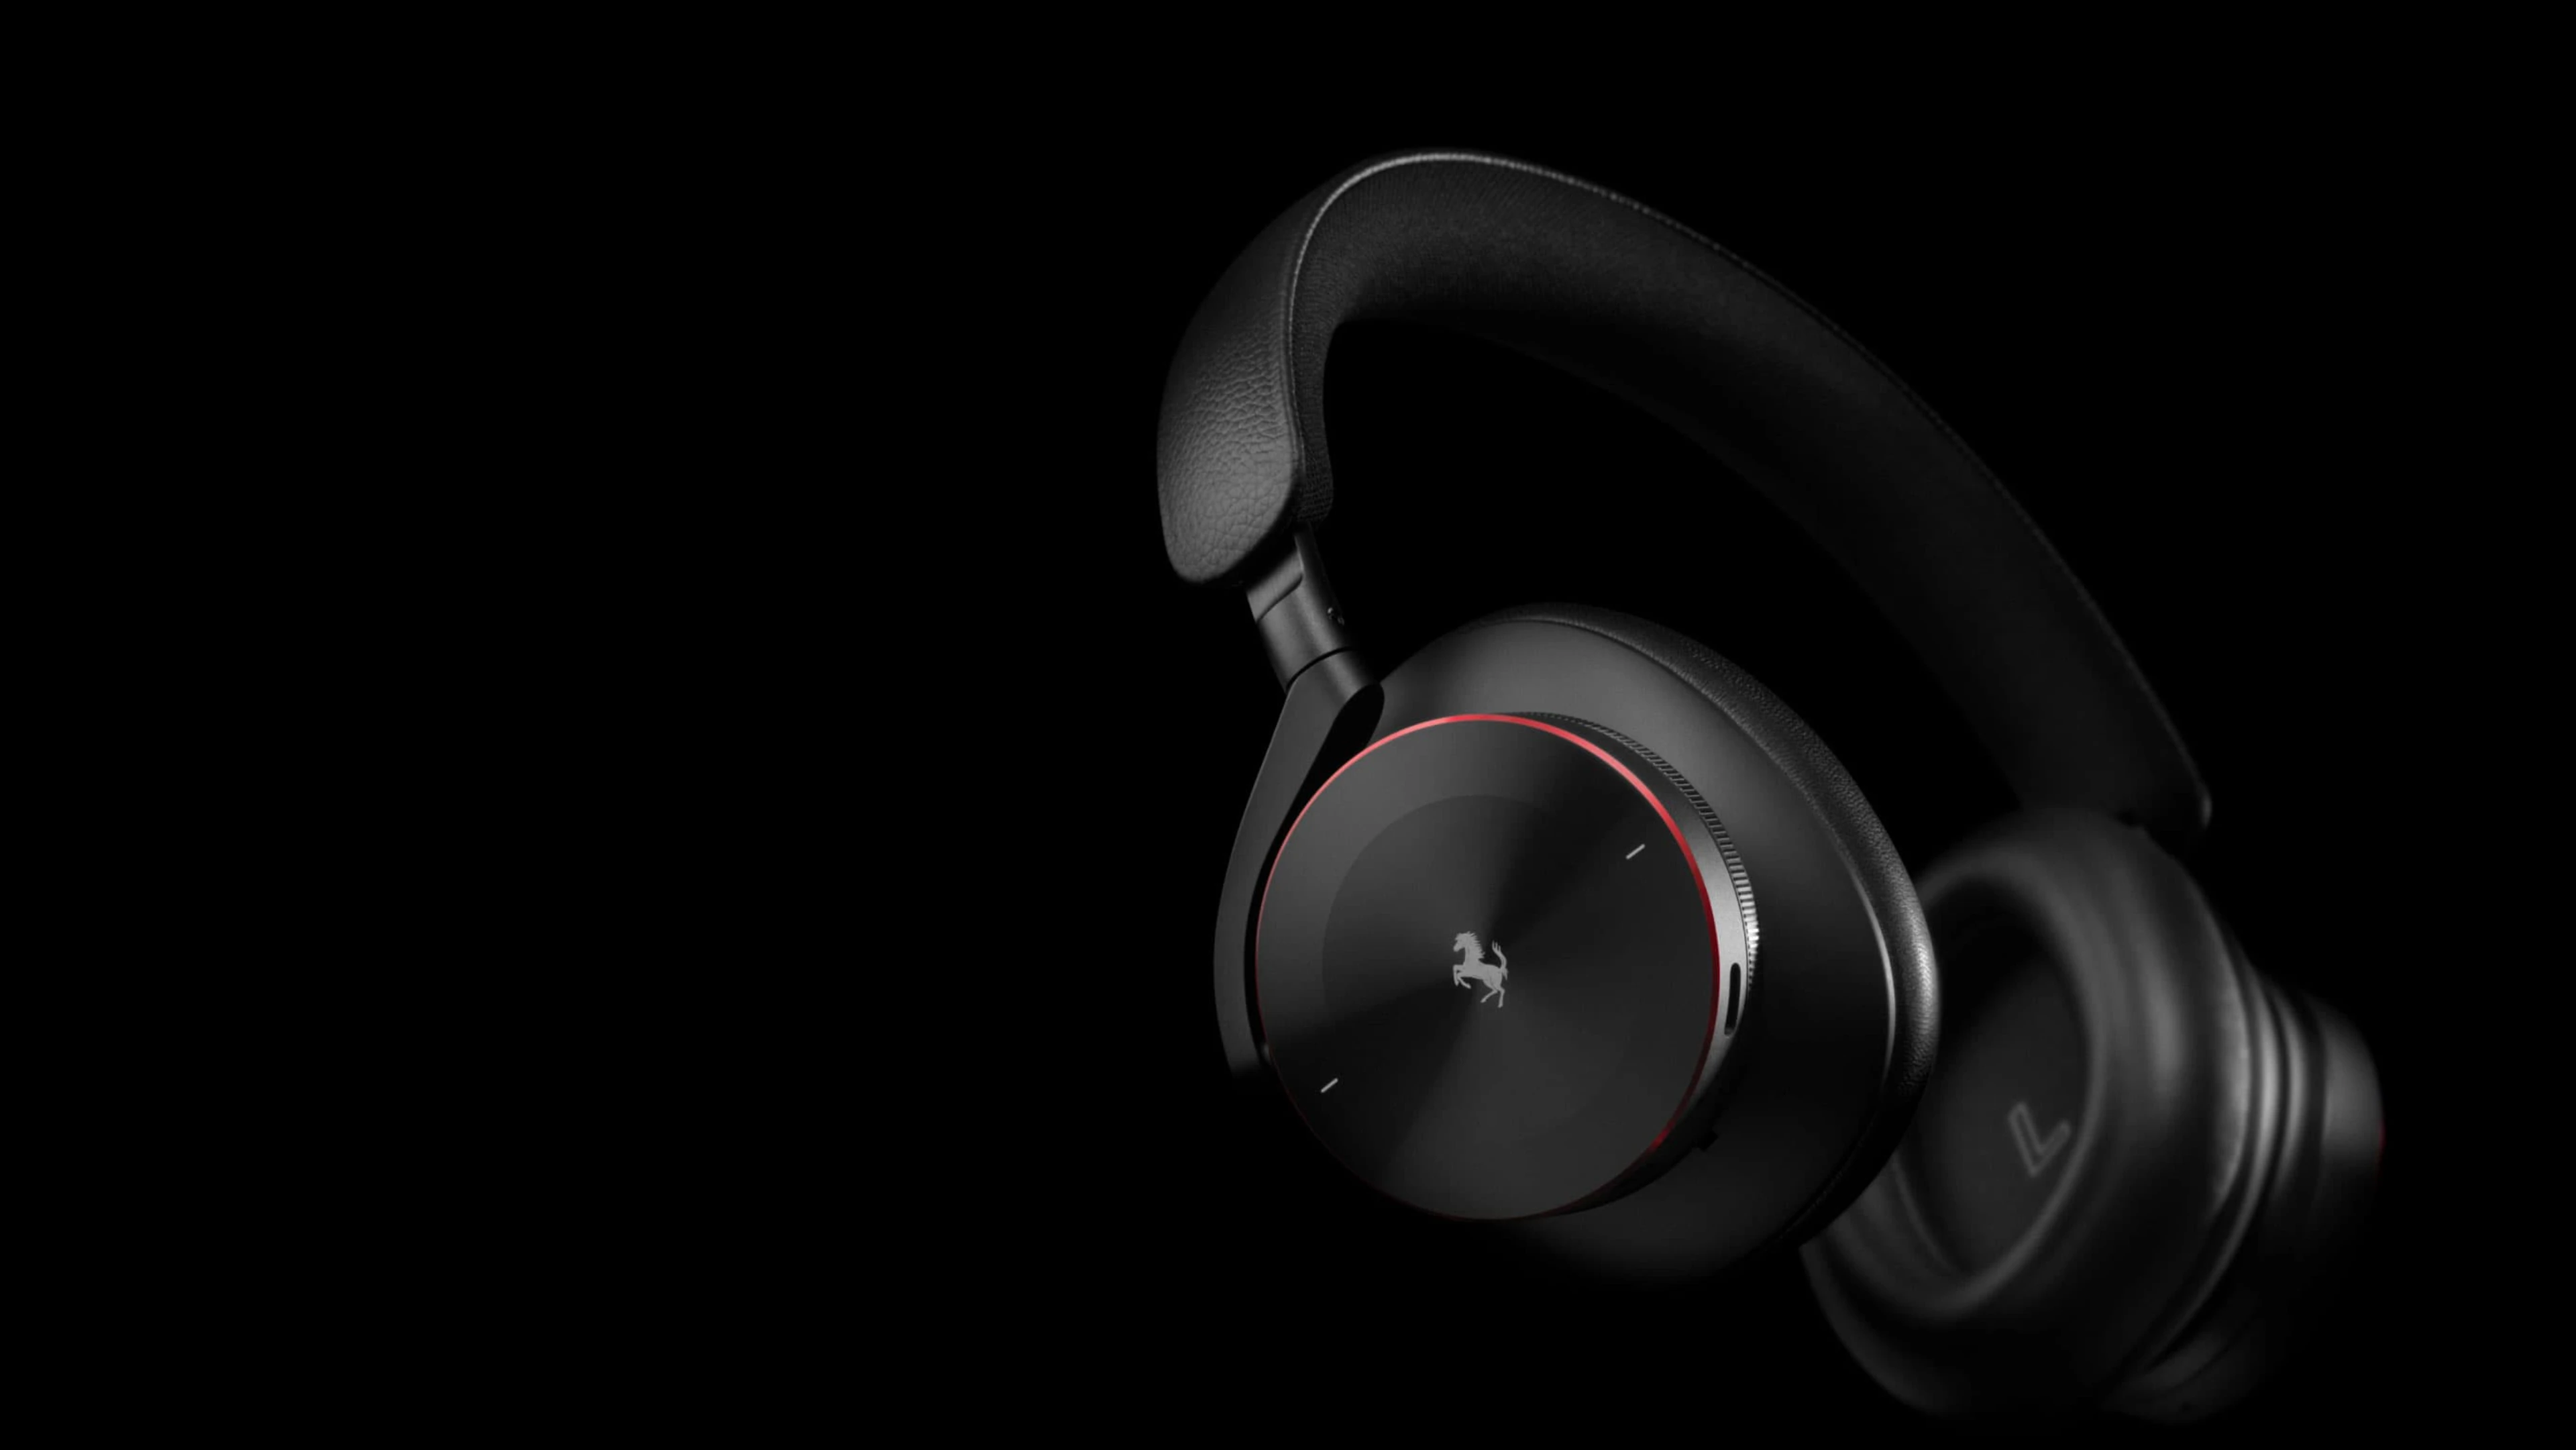 Image of the Beoplay H95 Ferrari Edition headphones on a black background